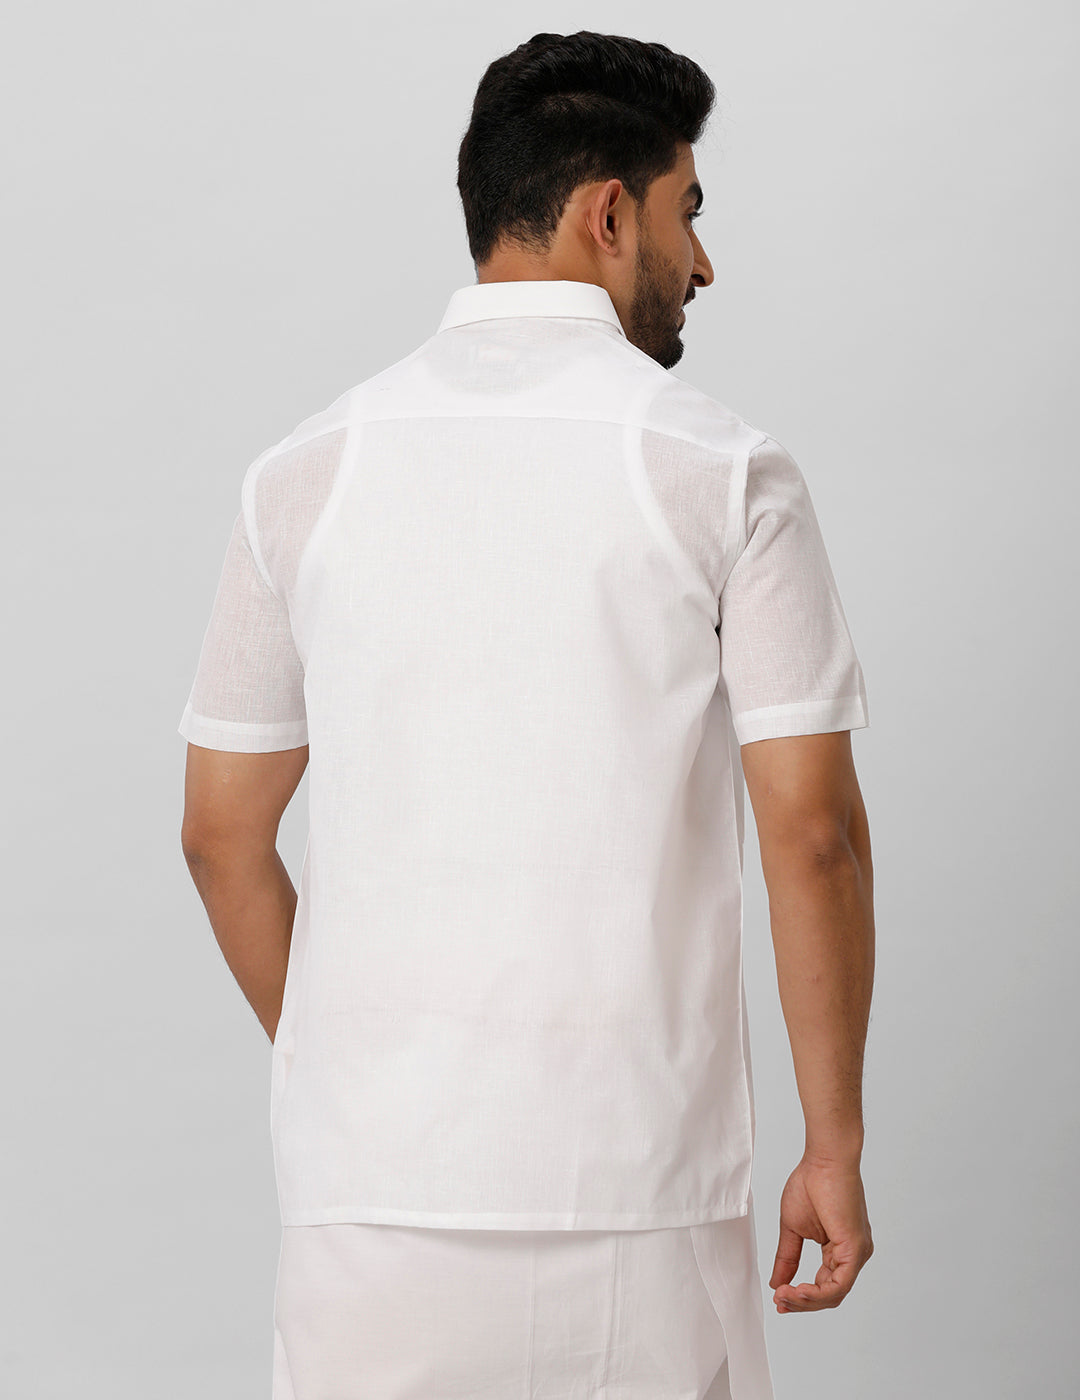 Mens Poly Cotton White Half Sleeves Shirt Minister Plus -Back view